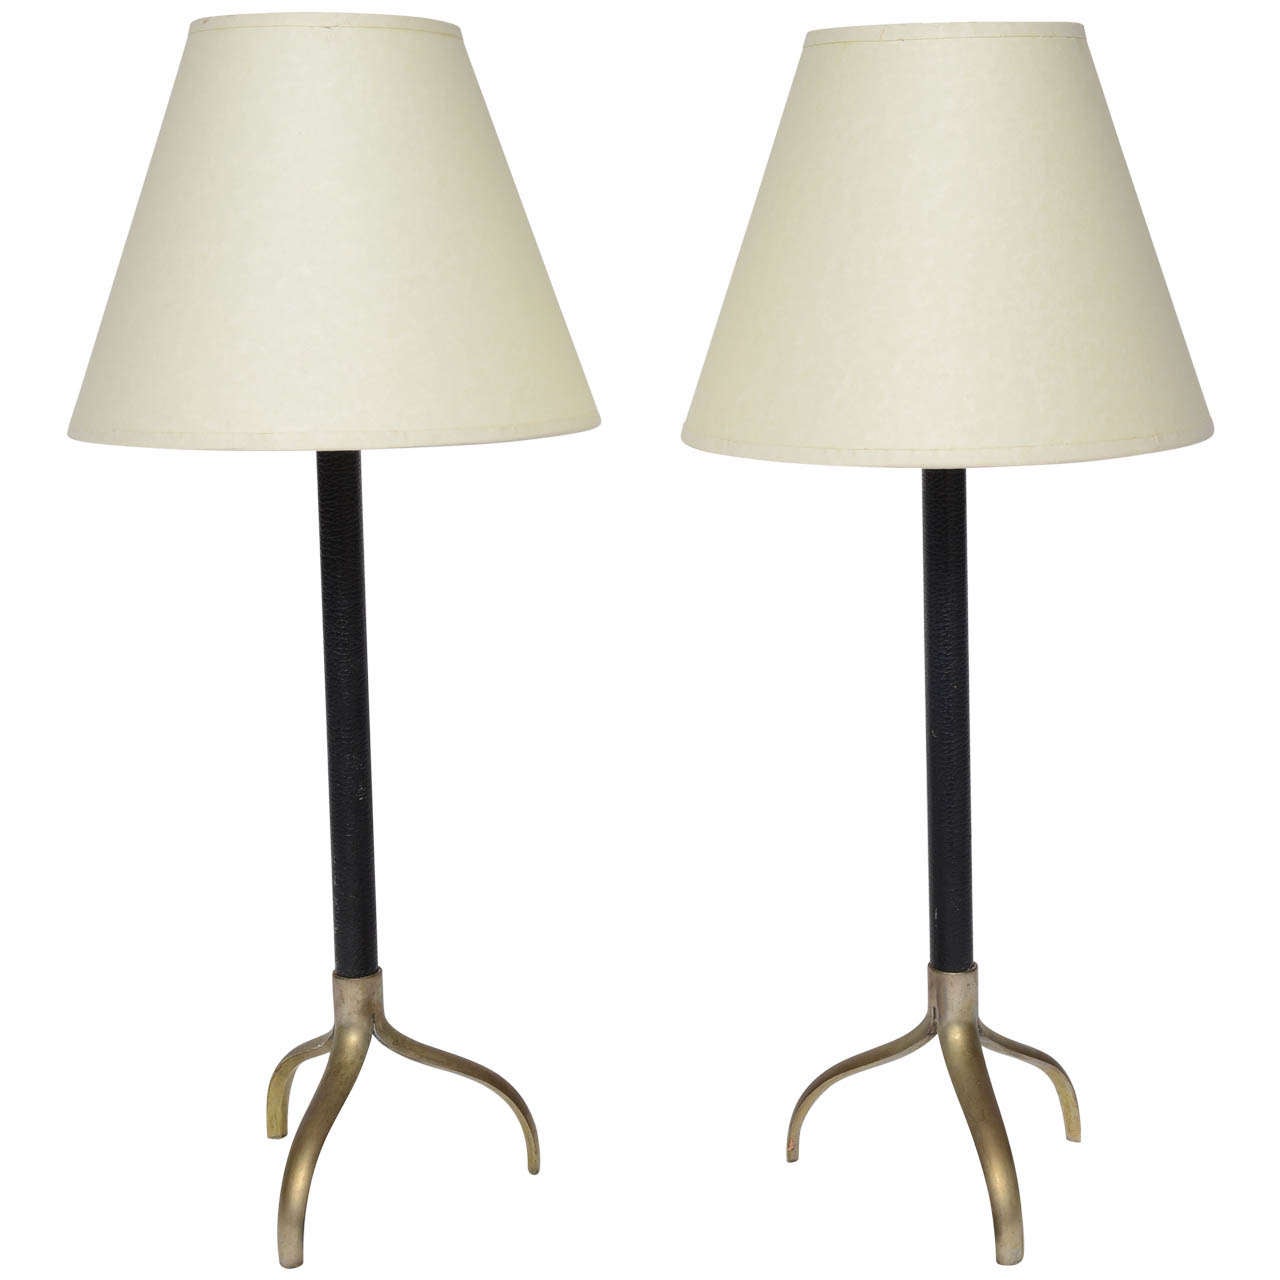 Pair of Stitched Leather Adnet Lamps